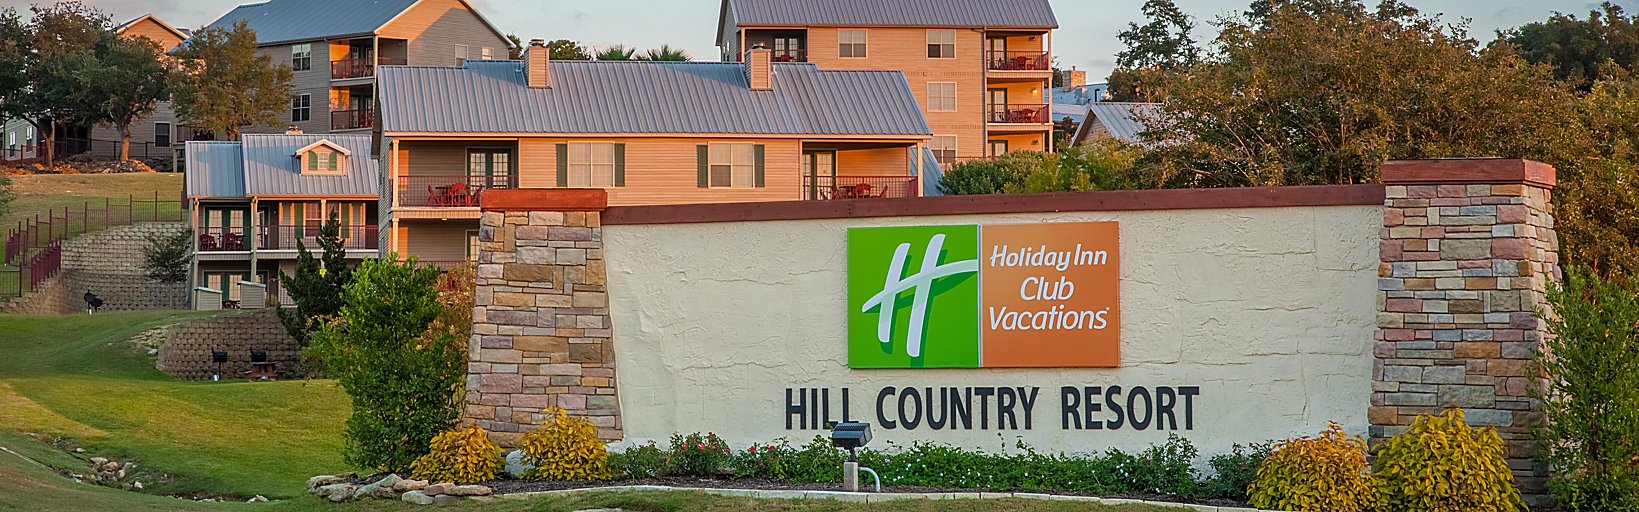 Holiday Inn Club Vacations Hill Country Resort Hotel By Ihg